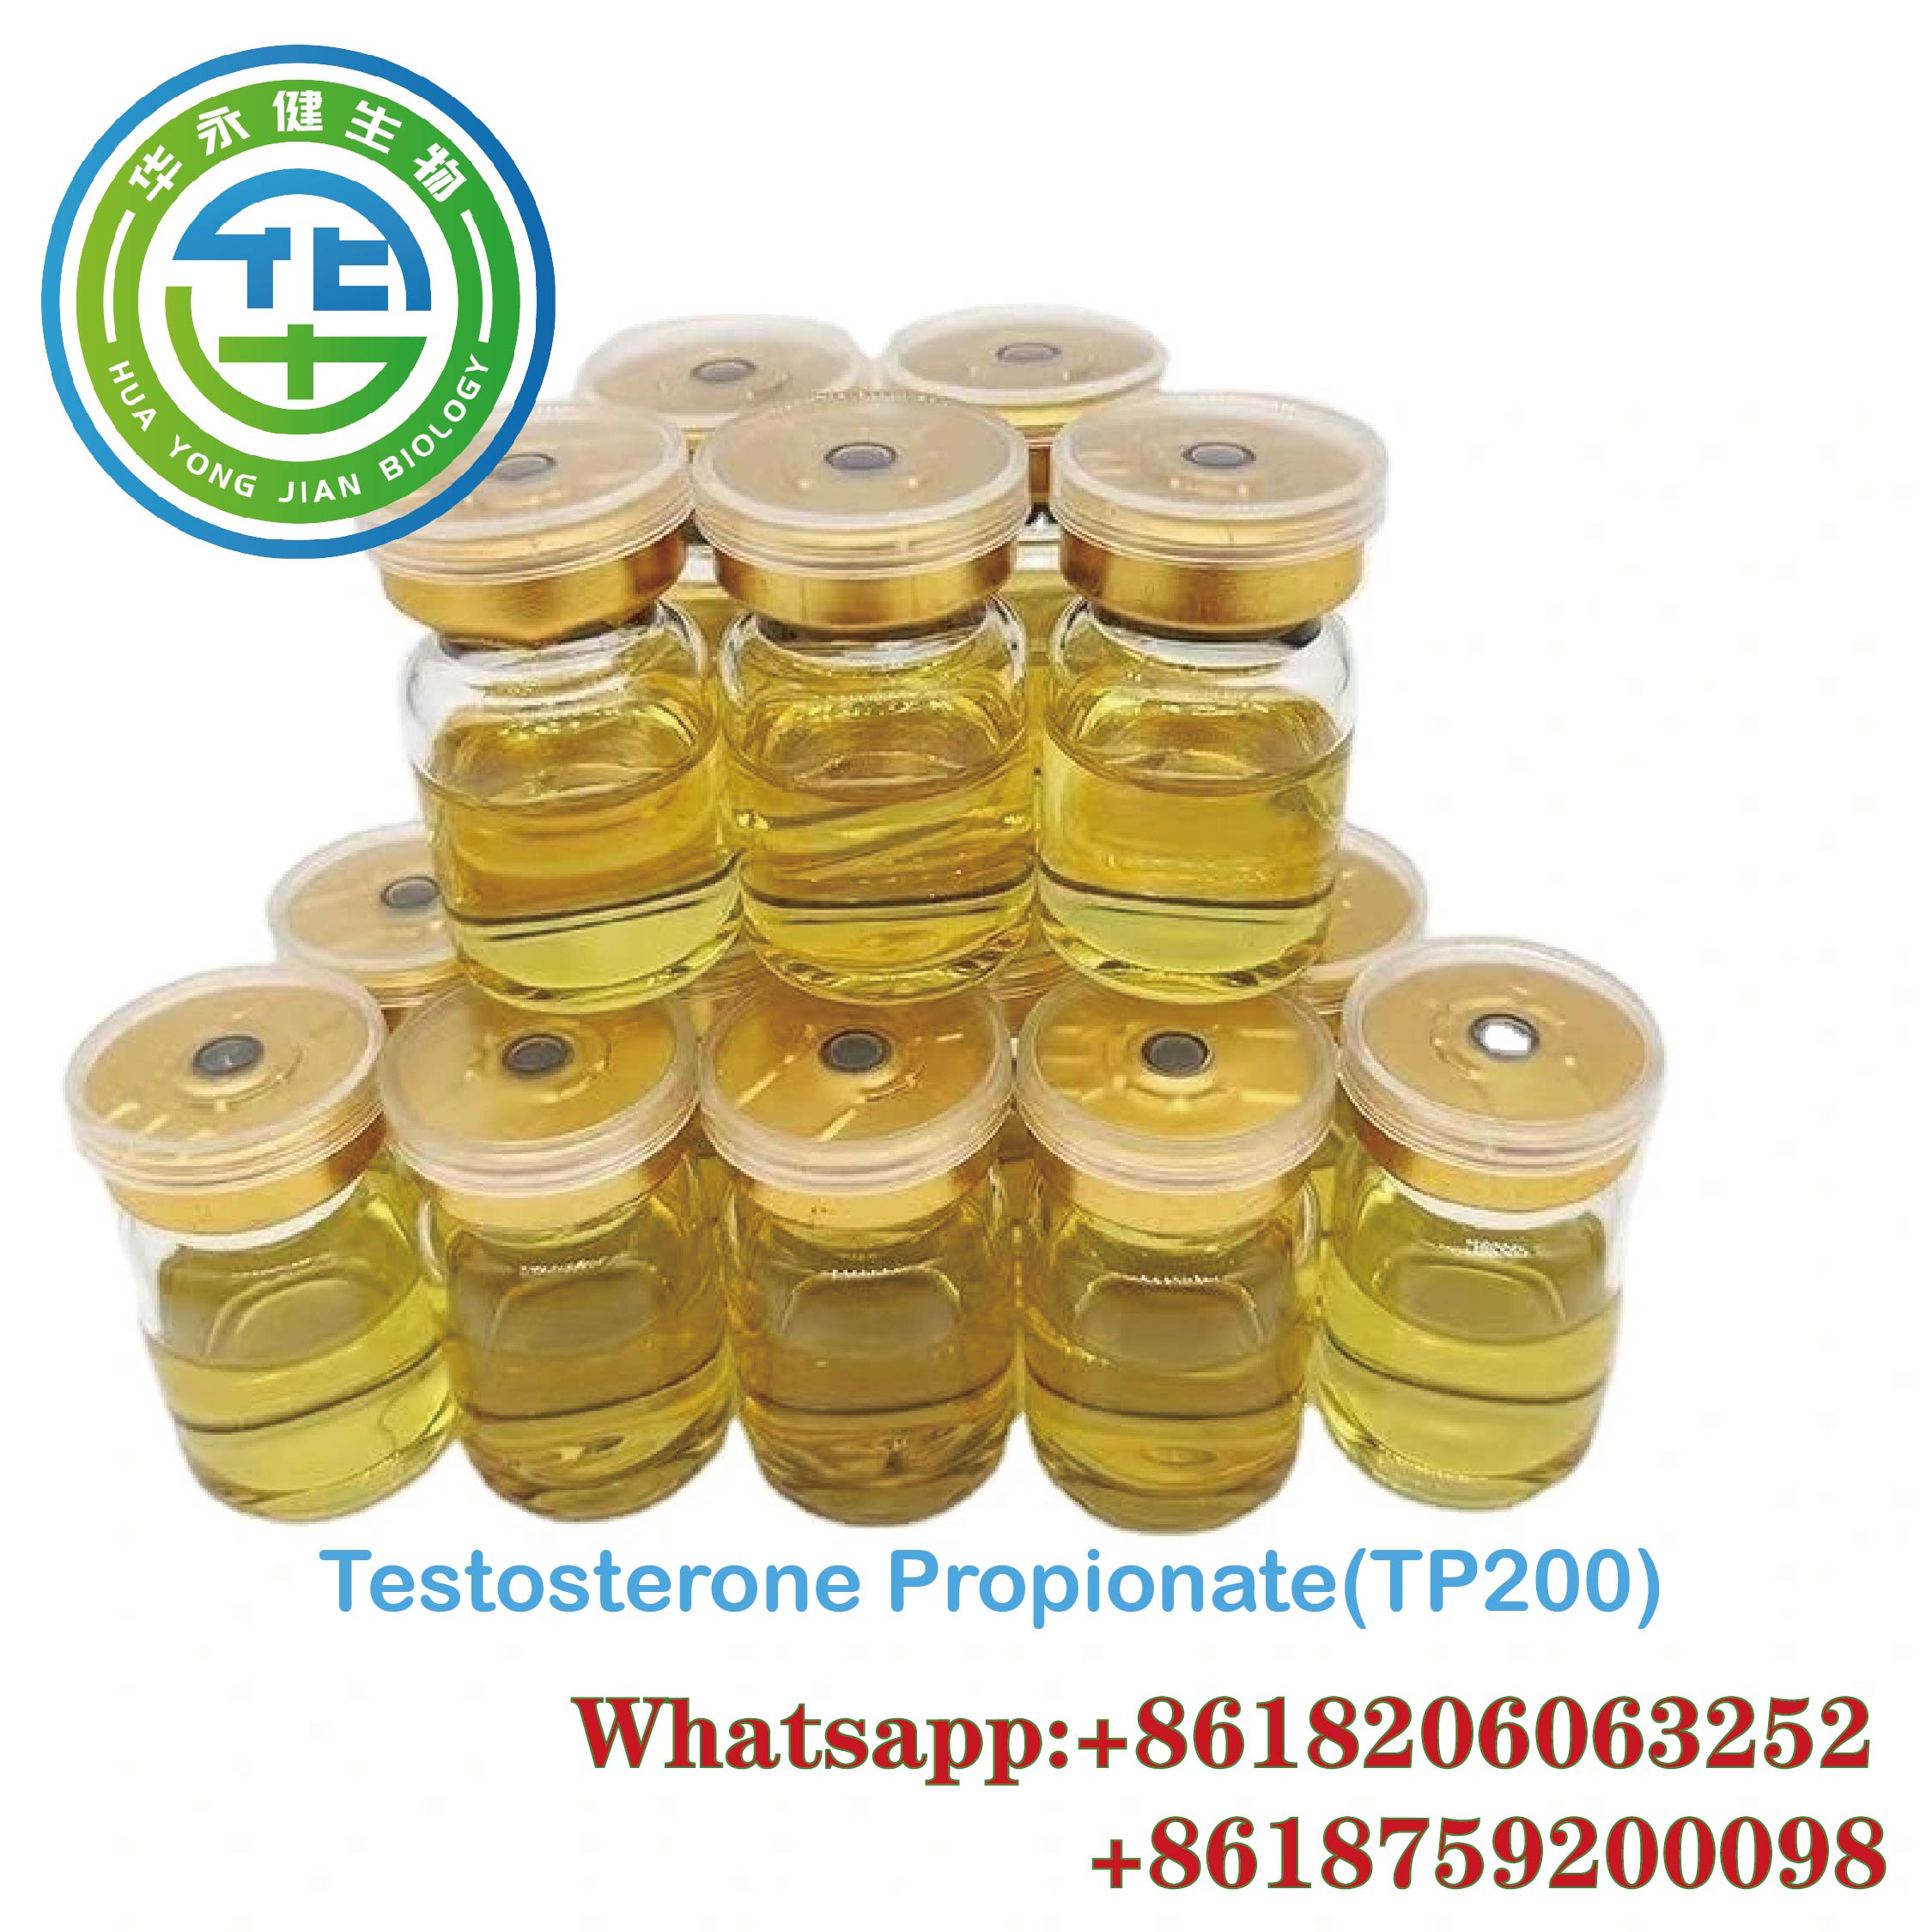 Semi Finished Testosterone Propionate 200  Anabolic Steroids TP 200 mg/ml For Bodybuilding Enhancement